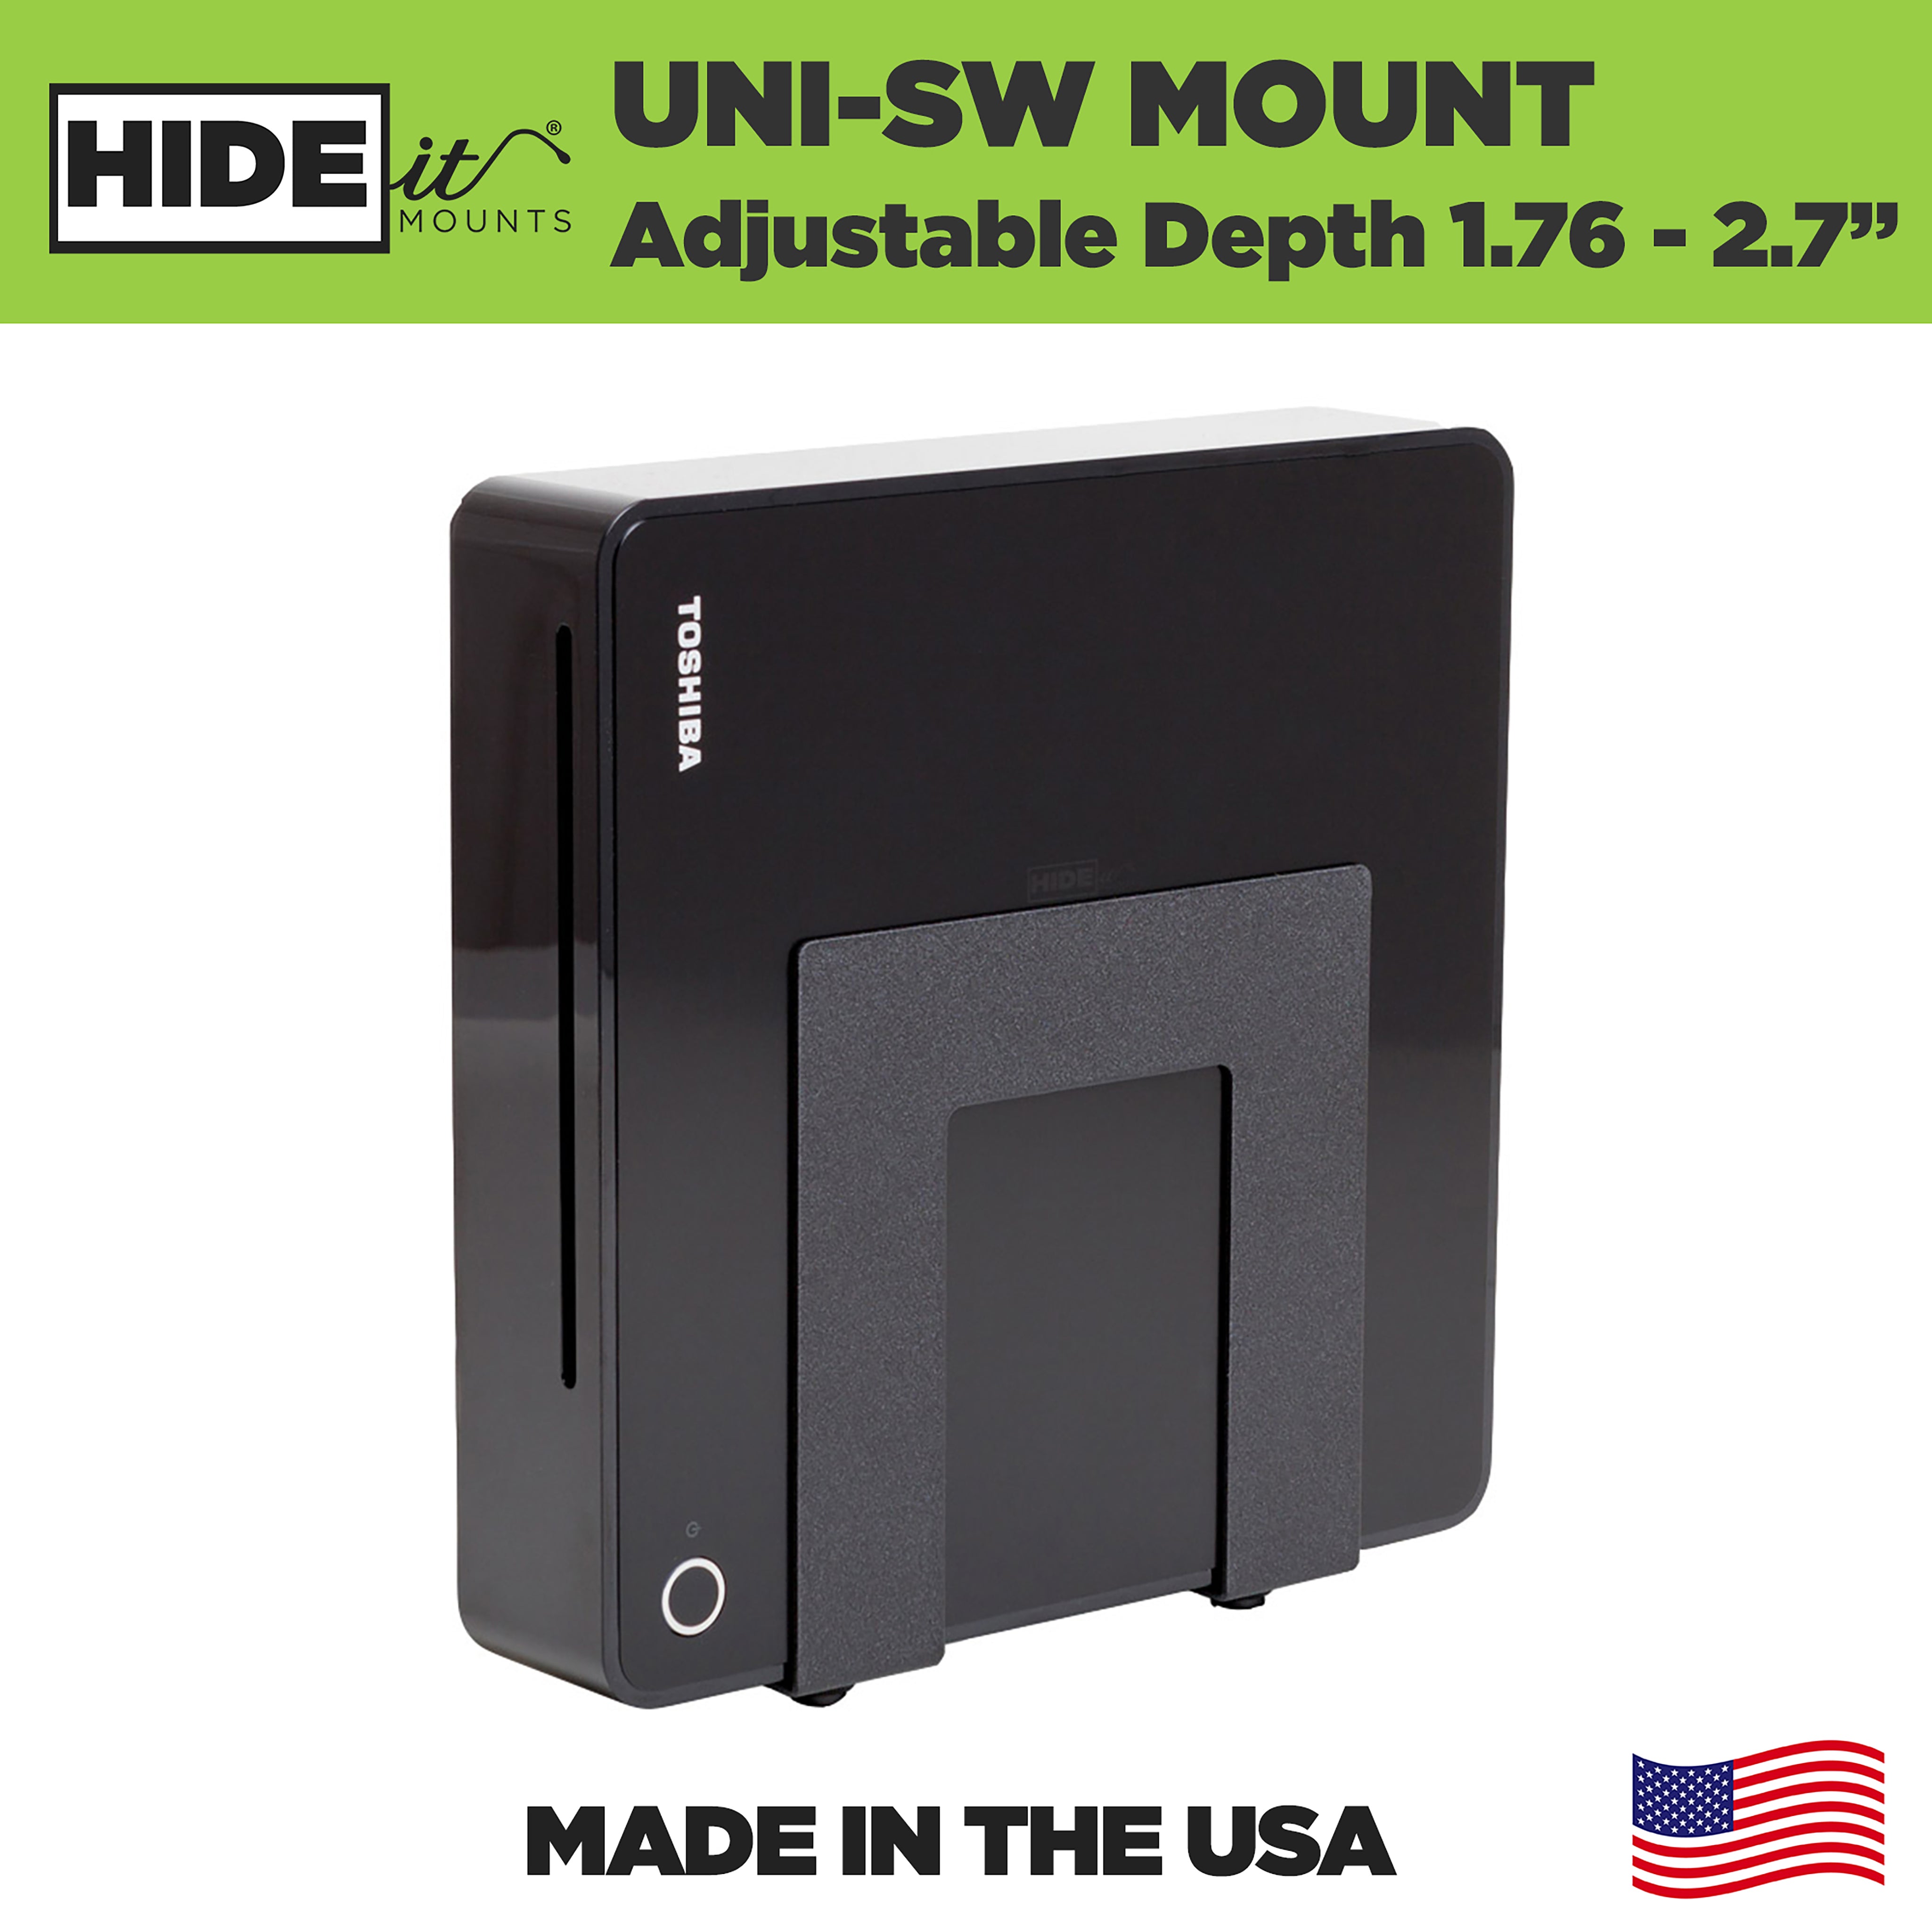 HIDEit Mounts Universal Small + Wide Wall Mount is Made in America by an American Company.